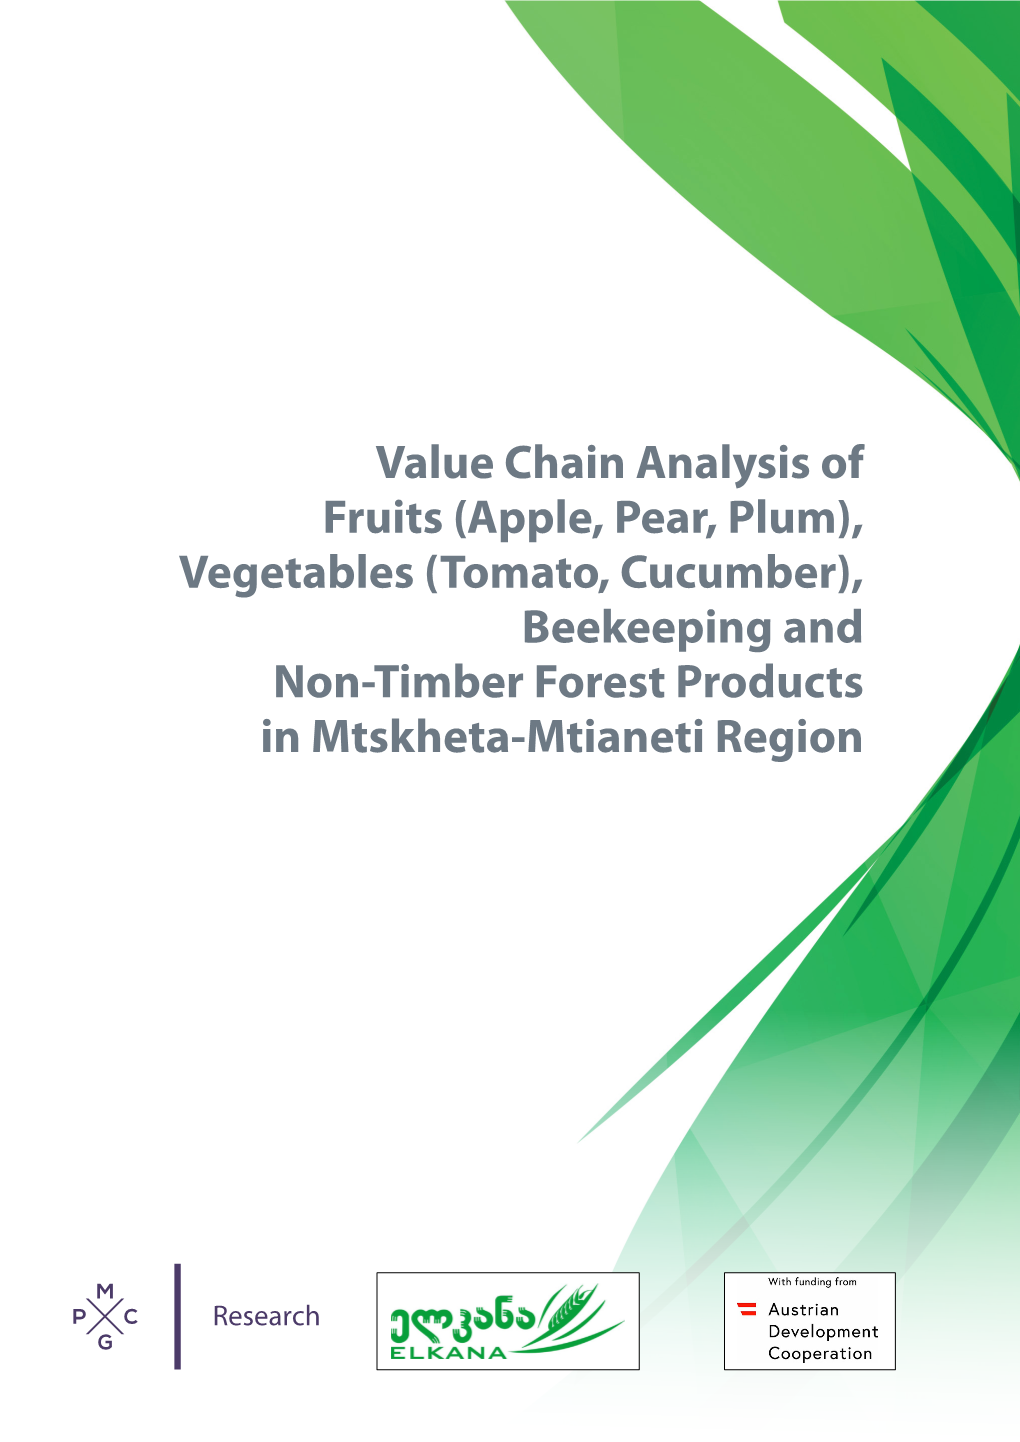 Value Chain Analysis of Fruits (Apple, Pear, Plum), Vegetables (Tomato, Cucumber), Beekeeping and Non-Timber Forest Products in Mtskheta-Mtianeti Region